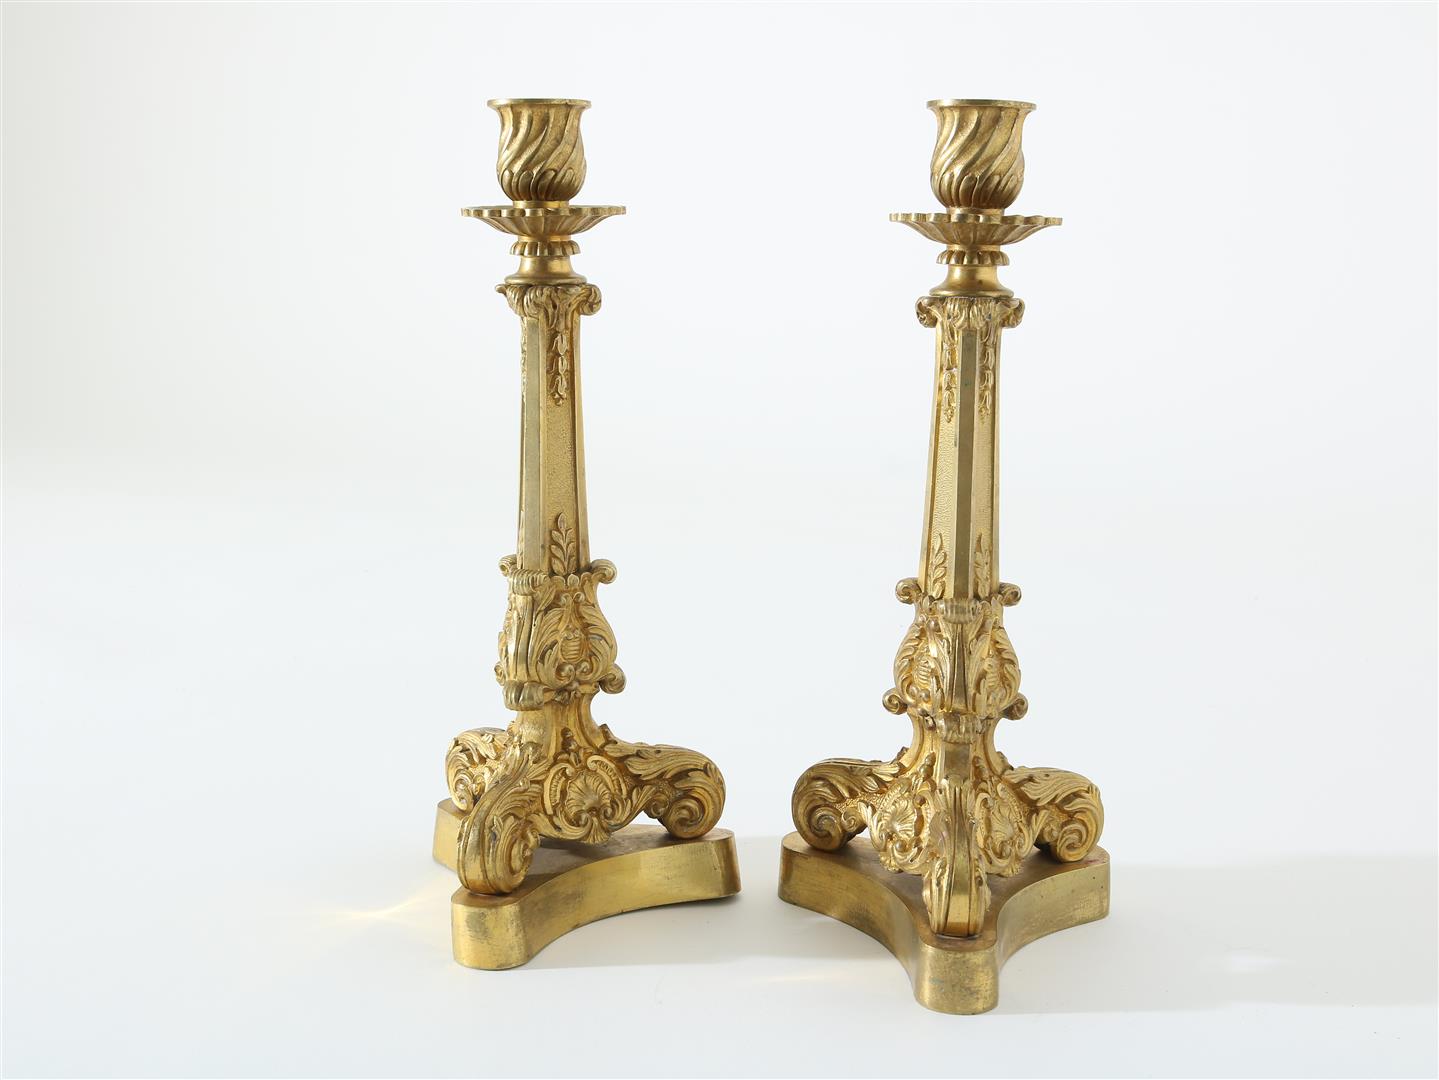 Set ormolu-gilded brass candlesticks, decorated with leaves and scallops, 19th century, height 29